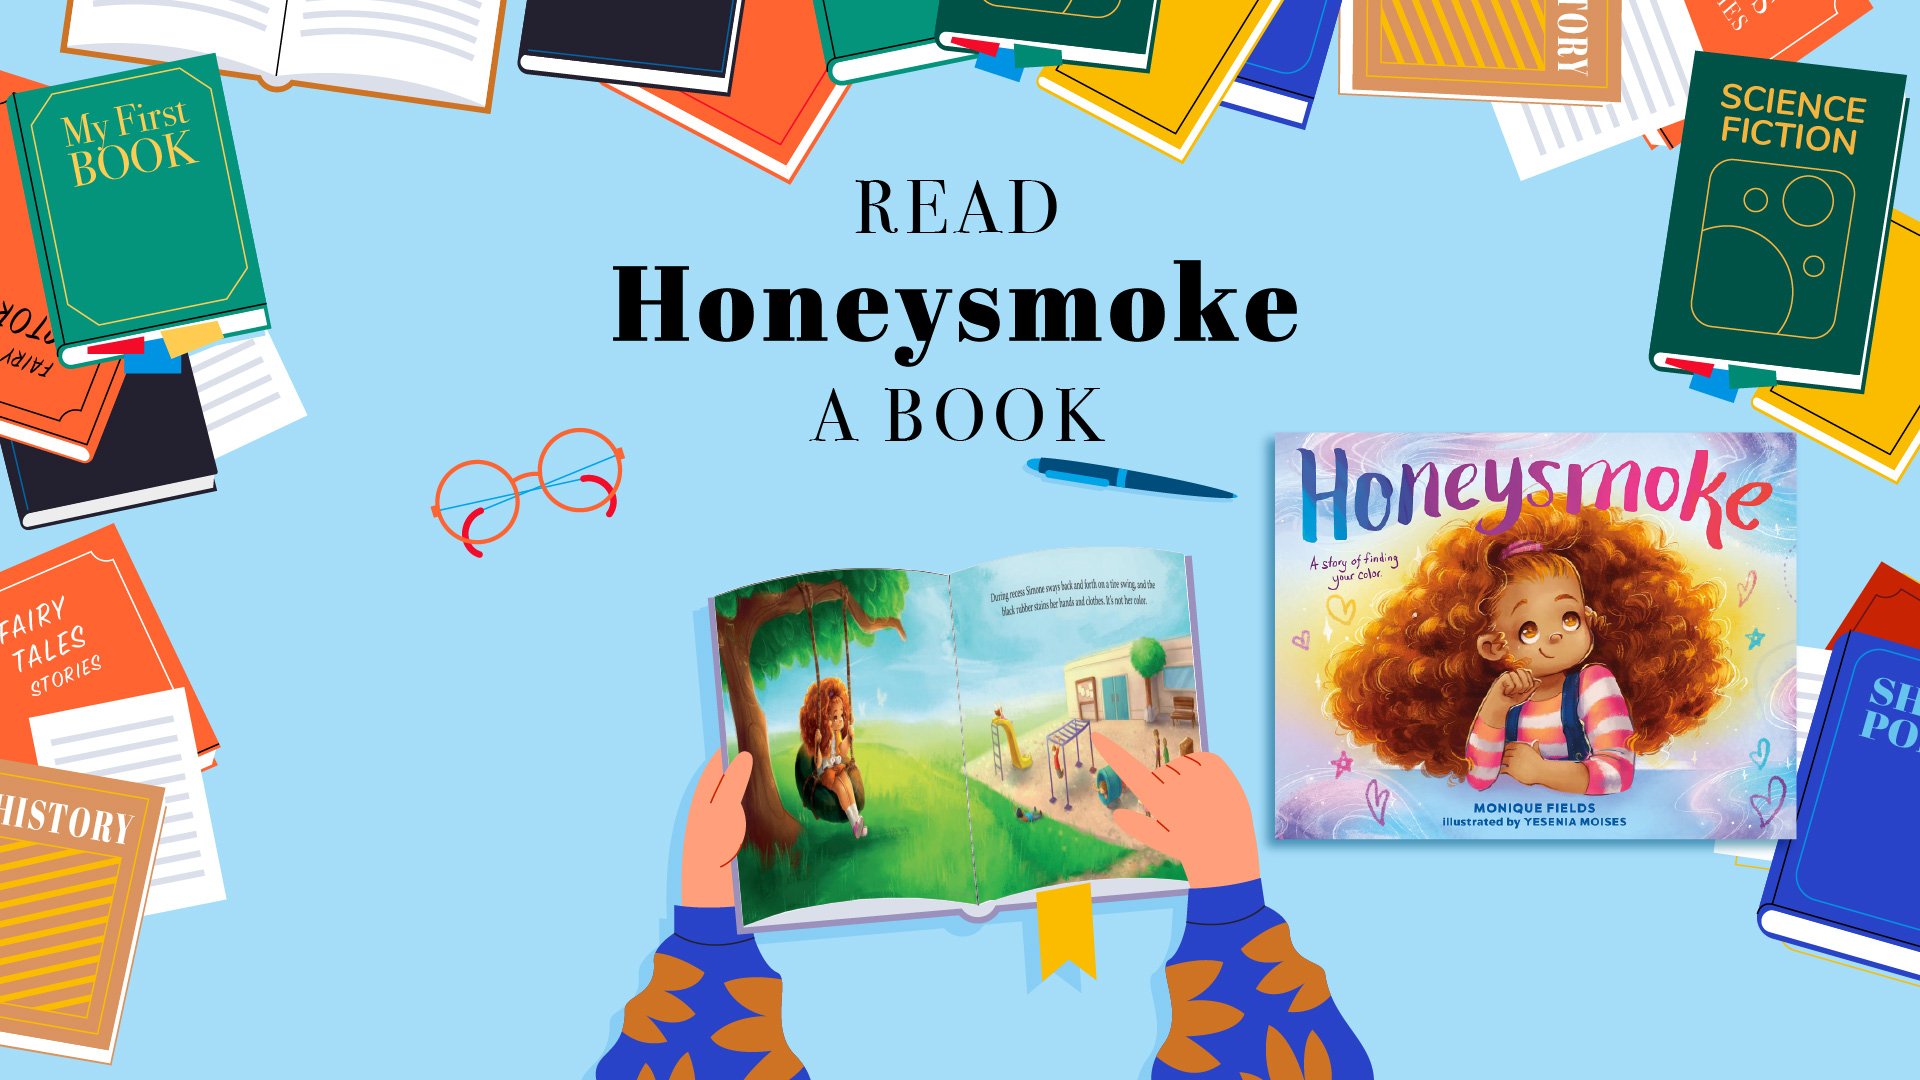 Books border, headline- first line: READ second line: Honeysmoke third line: A BOOK graphics of orange glasses, blue pen, a person opening a book and point at the two spread pages from Honeysmoke. The cover of Honeysmoke on right side.